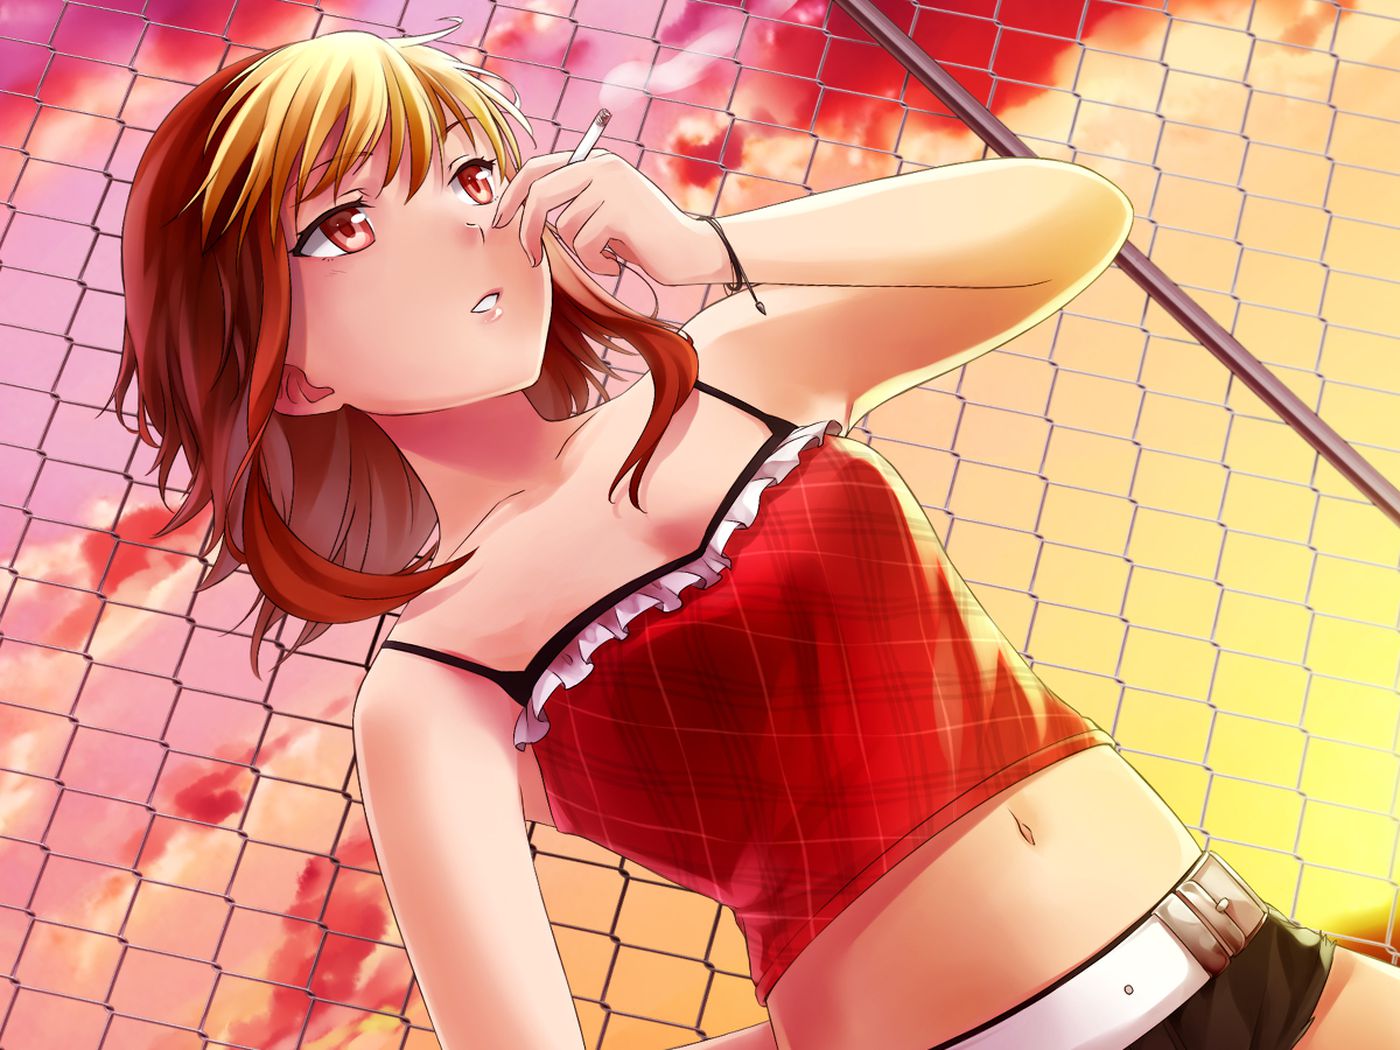 dawn gartrell recommends how to make huniepop uncensored pic